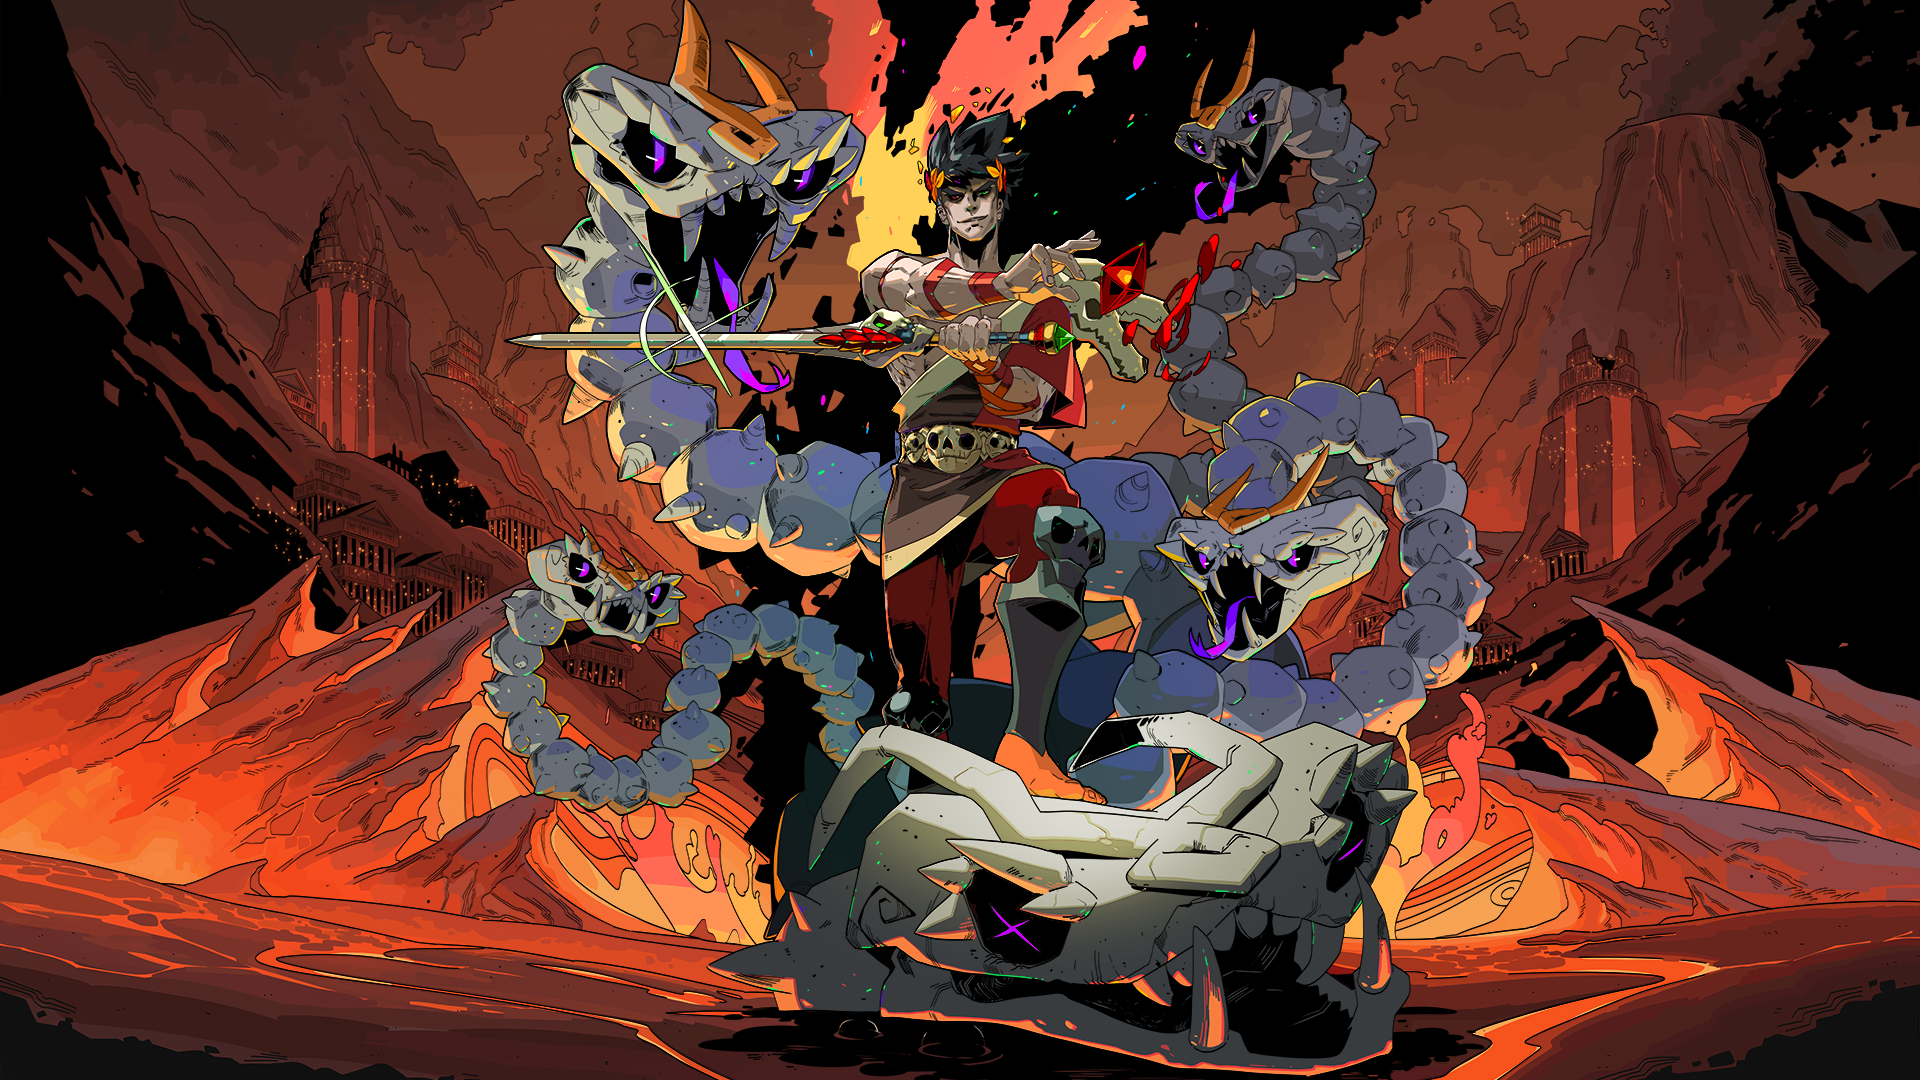 Zagreus poses before the hydra in Hades artwork,